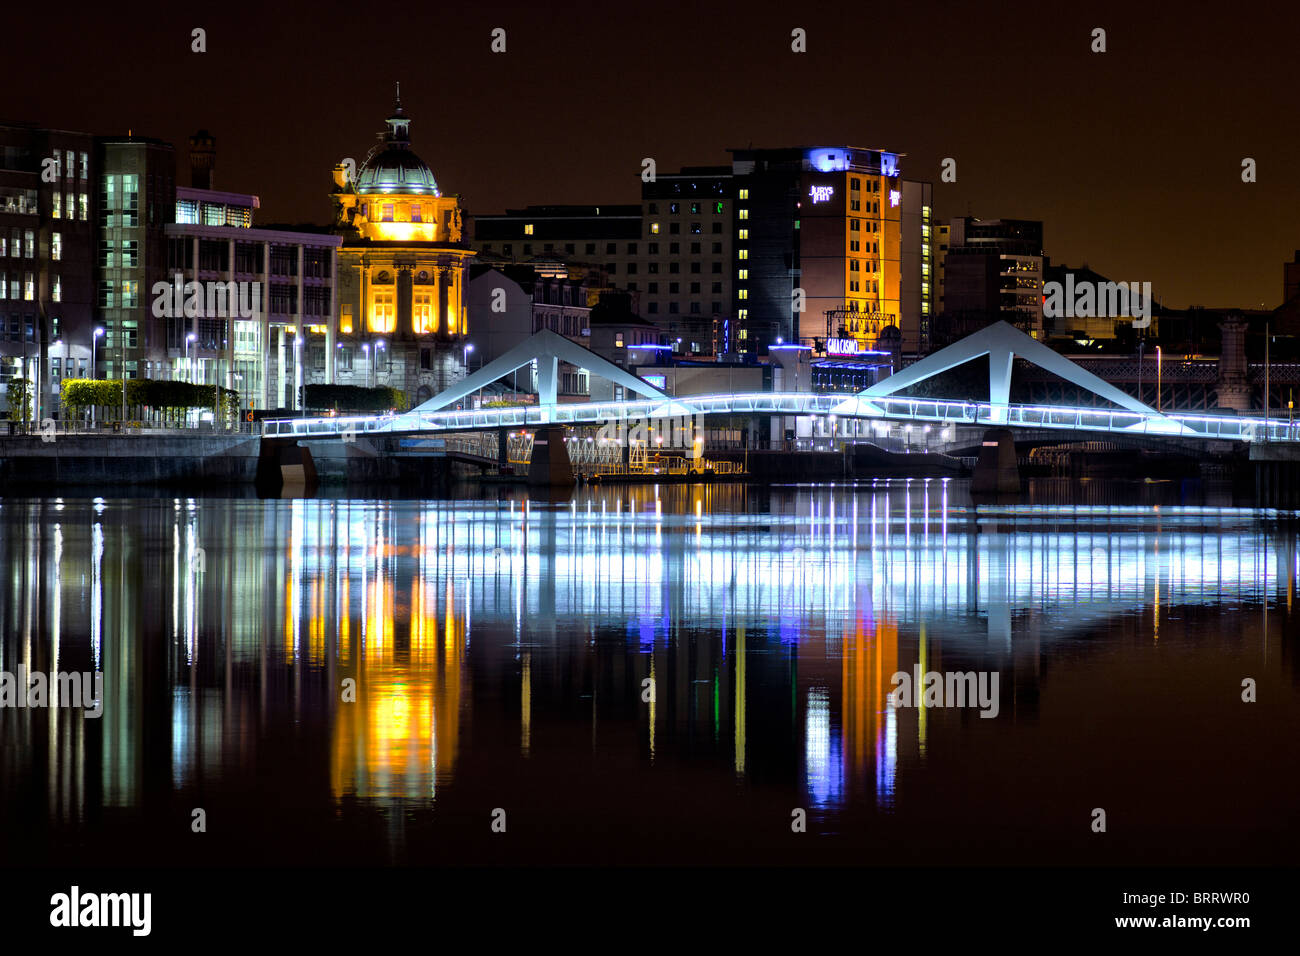 Glasgow's Squinty Bridge at night over the river Clyde. Stock Photo